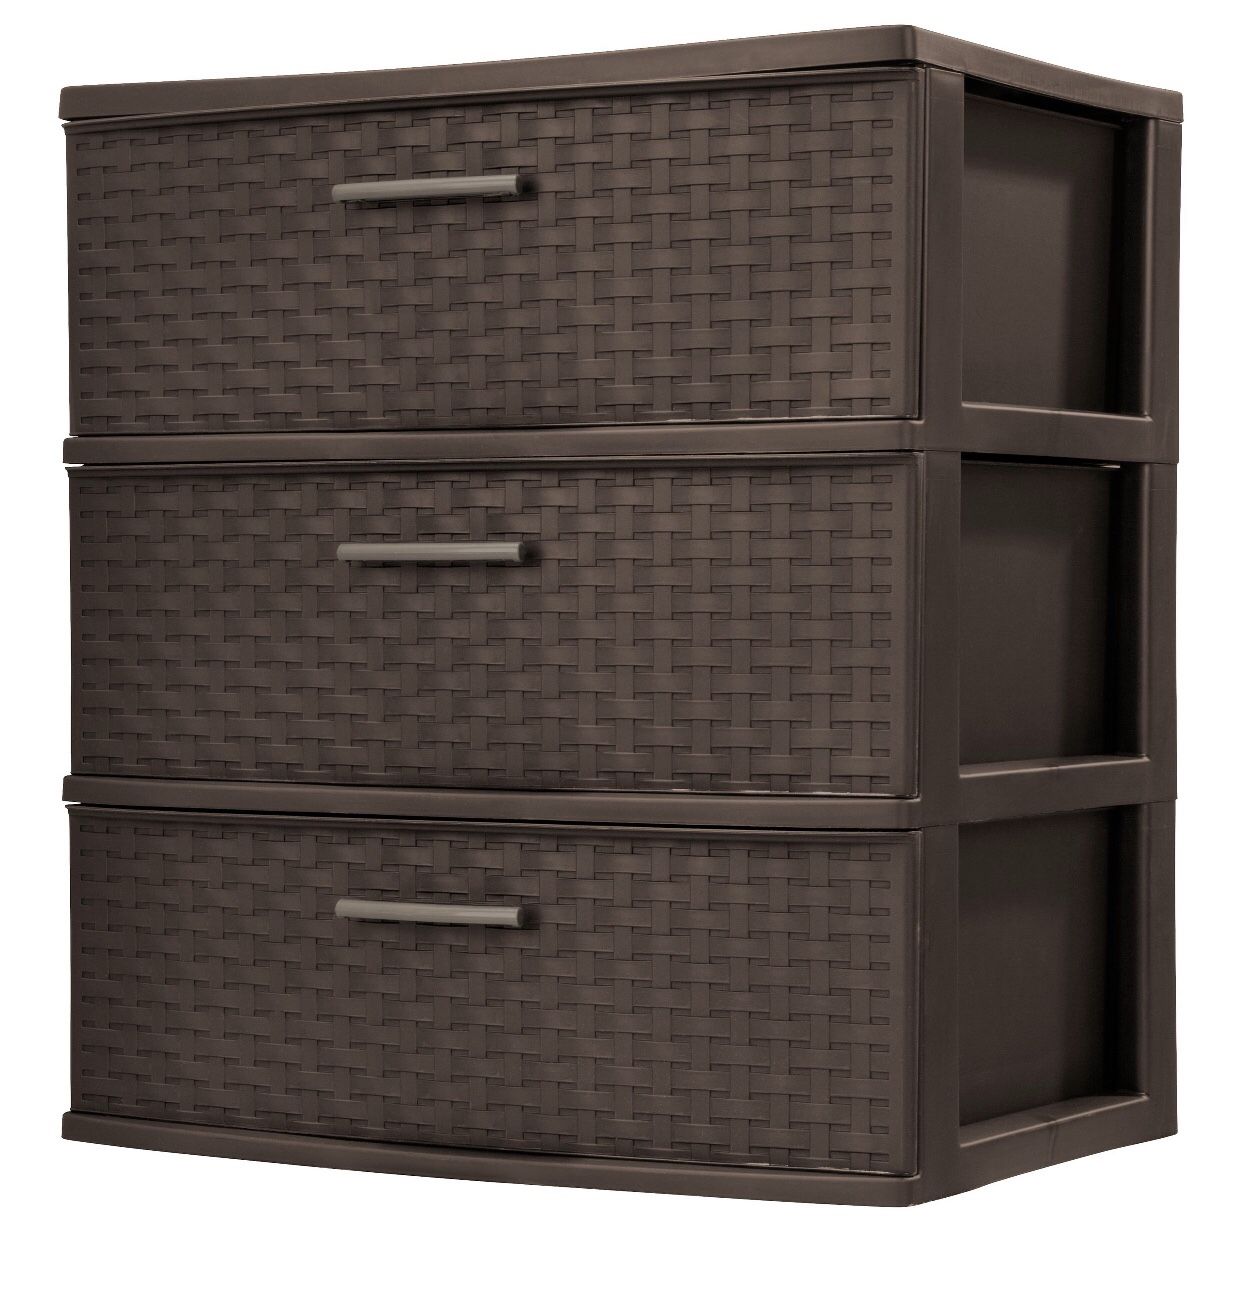 (Selling 3 qty) of Sterilite® 3-Drawer Wide Tower